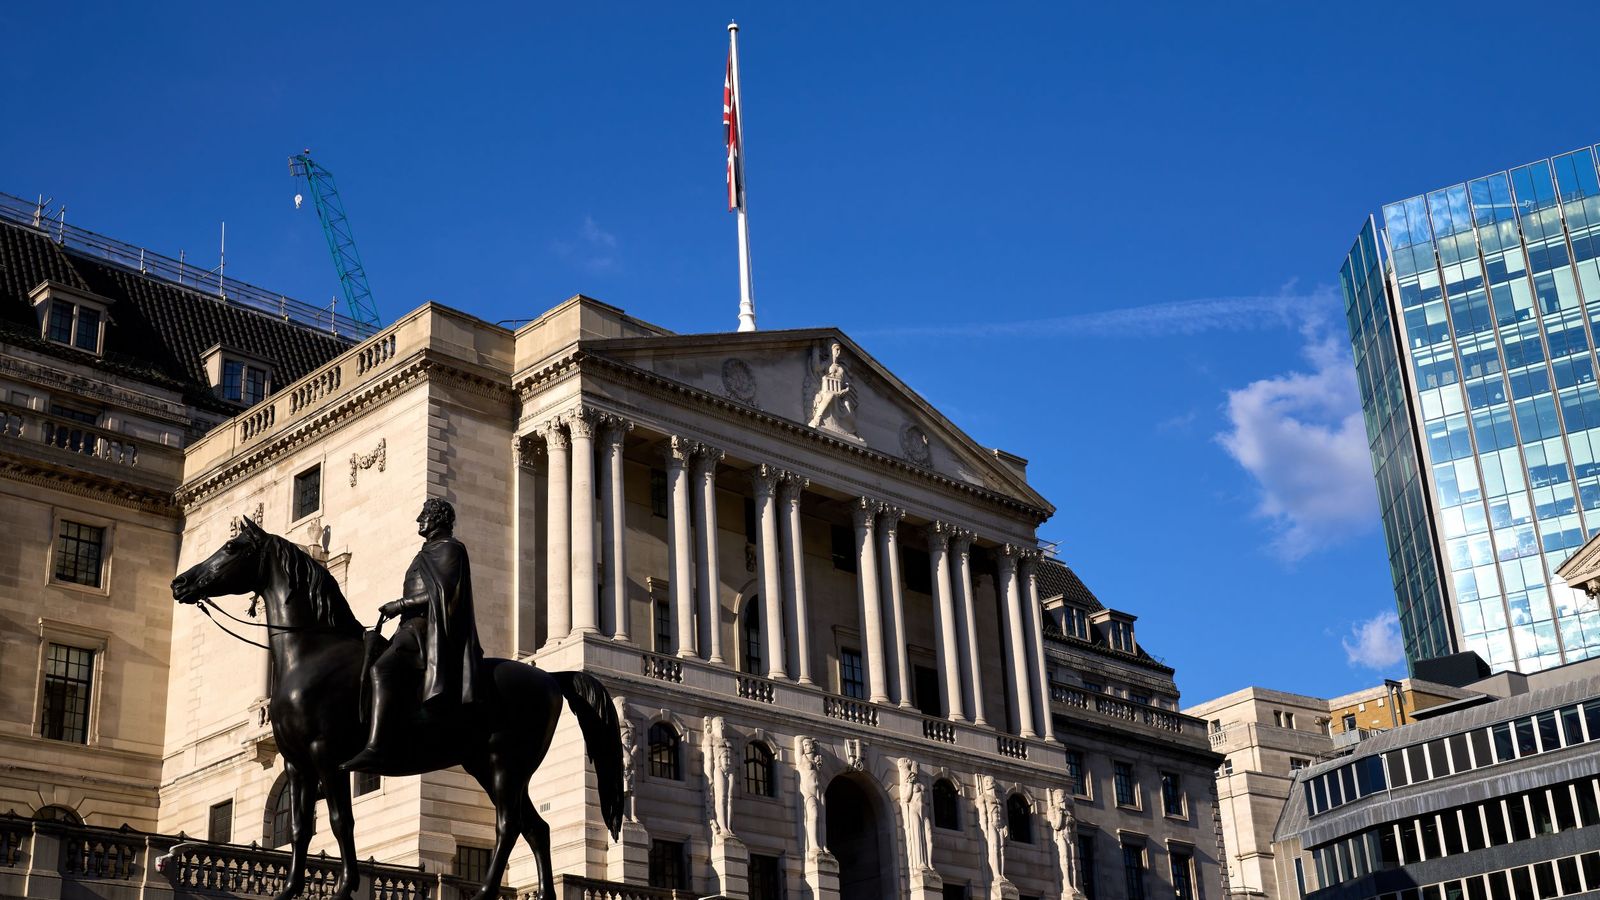 Bank of England official hints interest rates may not rise as much as market expects